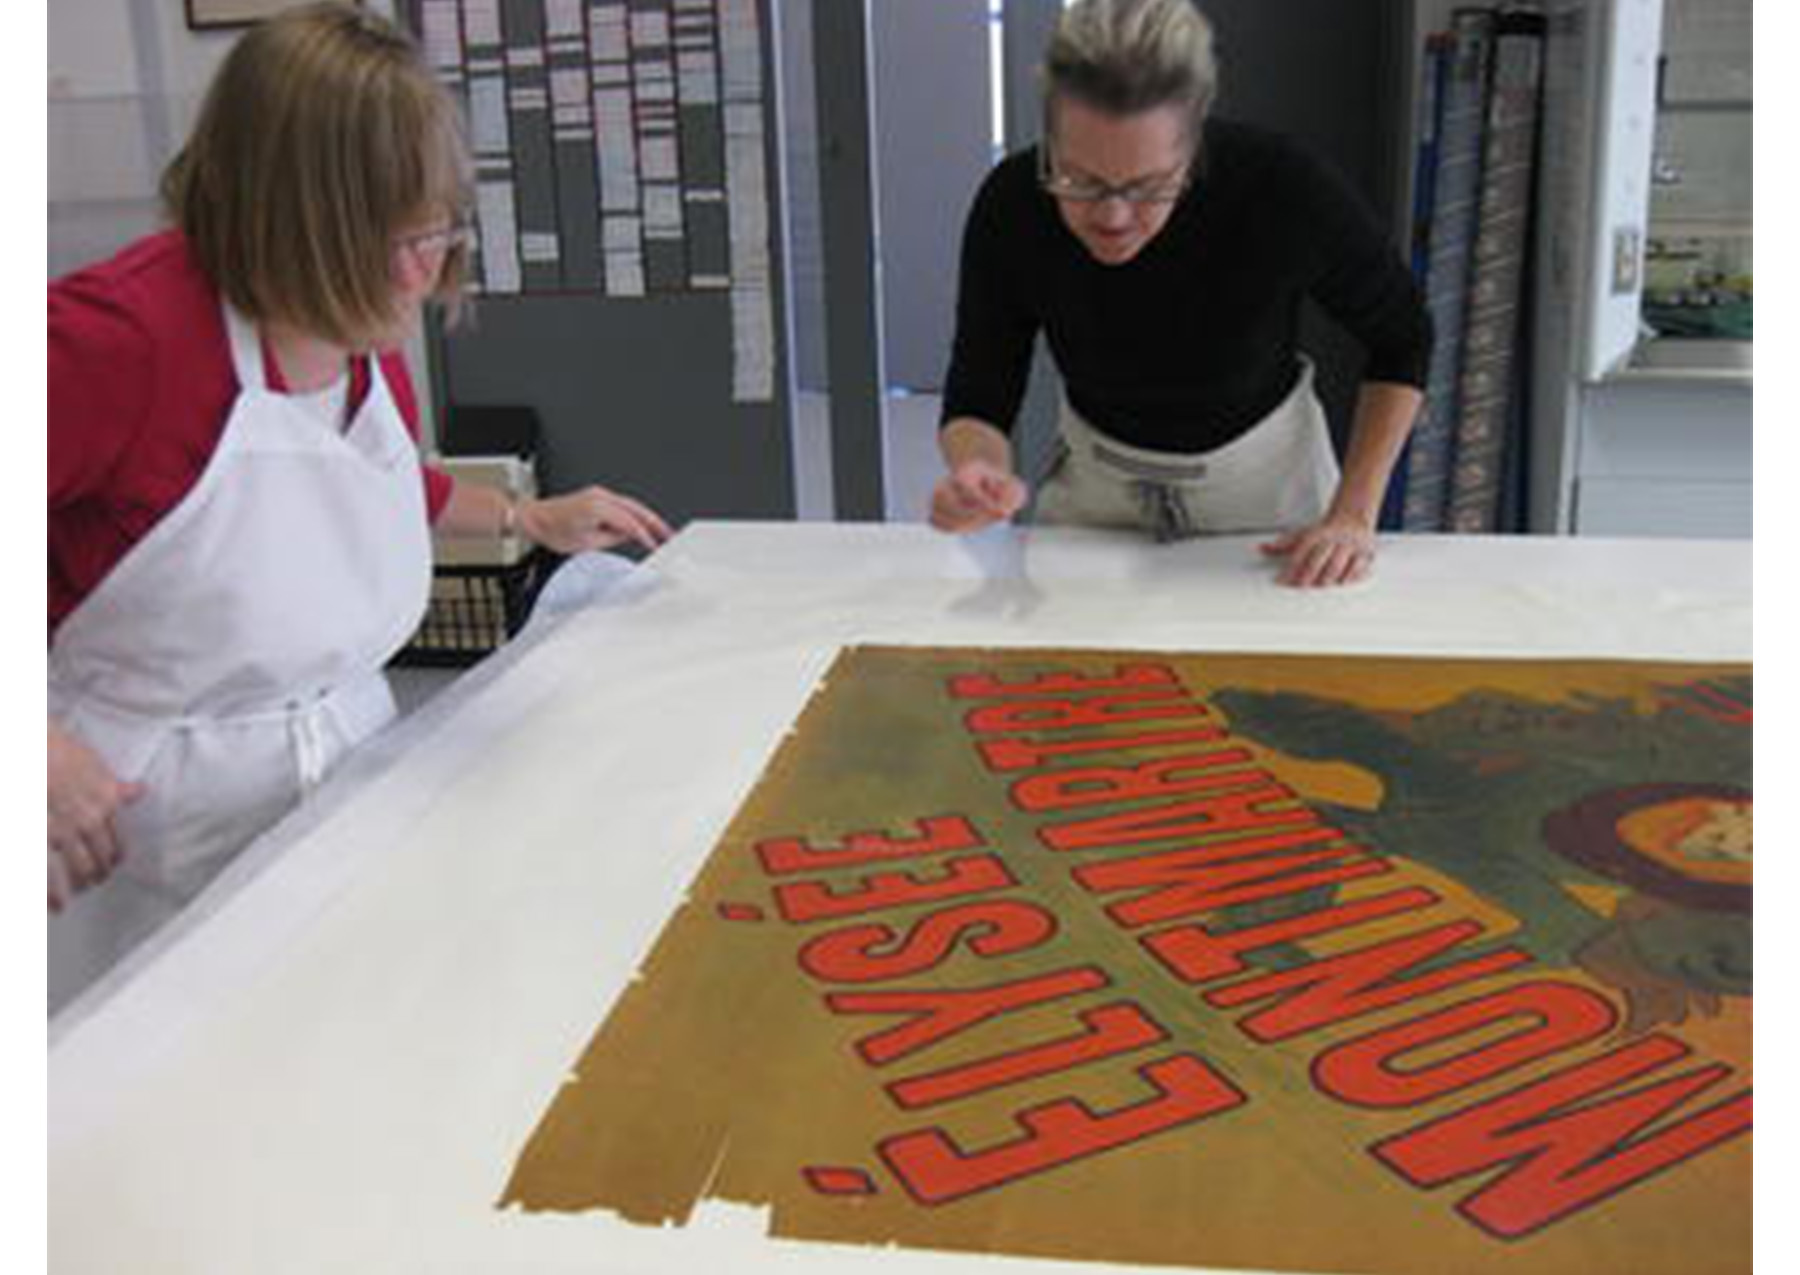 two woman stand over a table, examining the edges of a poster